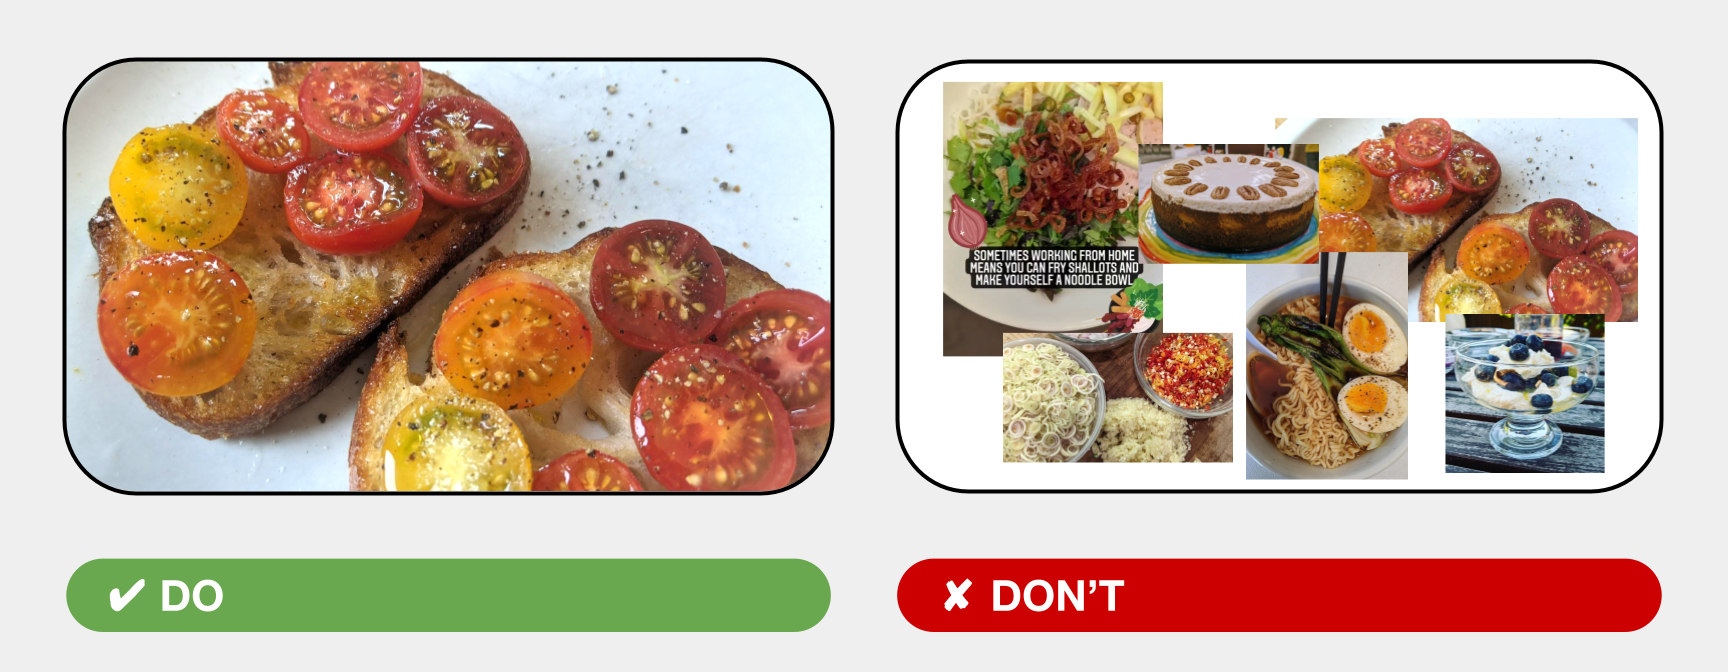 An example of what to do: a single image of tomatoes on bruschetta filling a slide, and an example of what NOT to do: multiple photos of food filling a single slide, in a cluttered arrangement